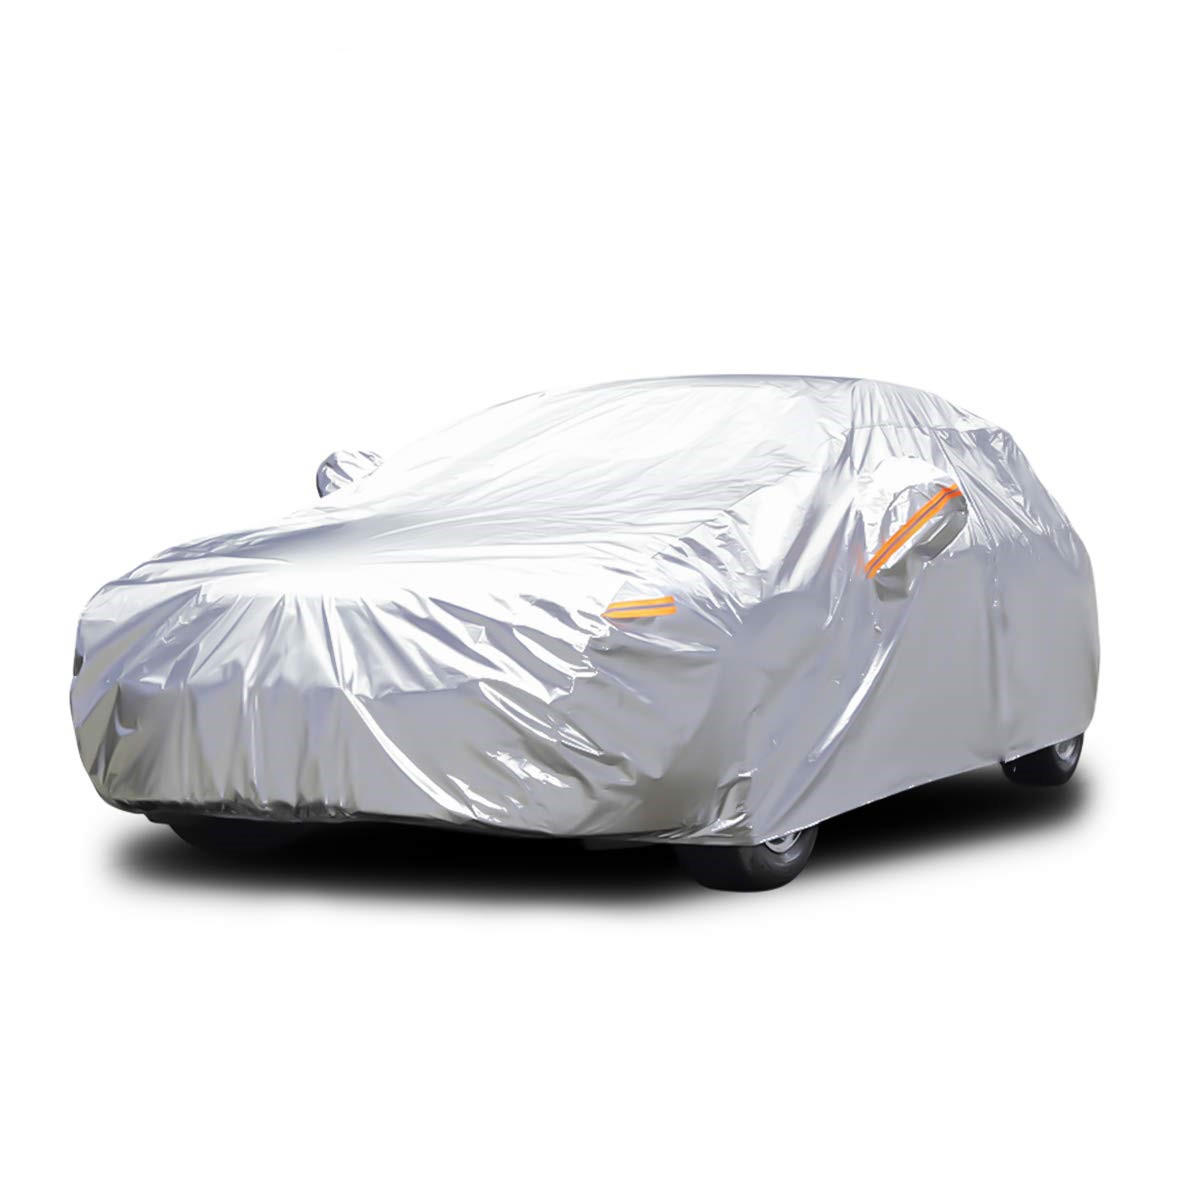 

Audew Five Layers Waterproof All Weather Car Cover Rain Sun Uv Dust Protection For Automobiles Indoor Outdoor Fit Full S